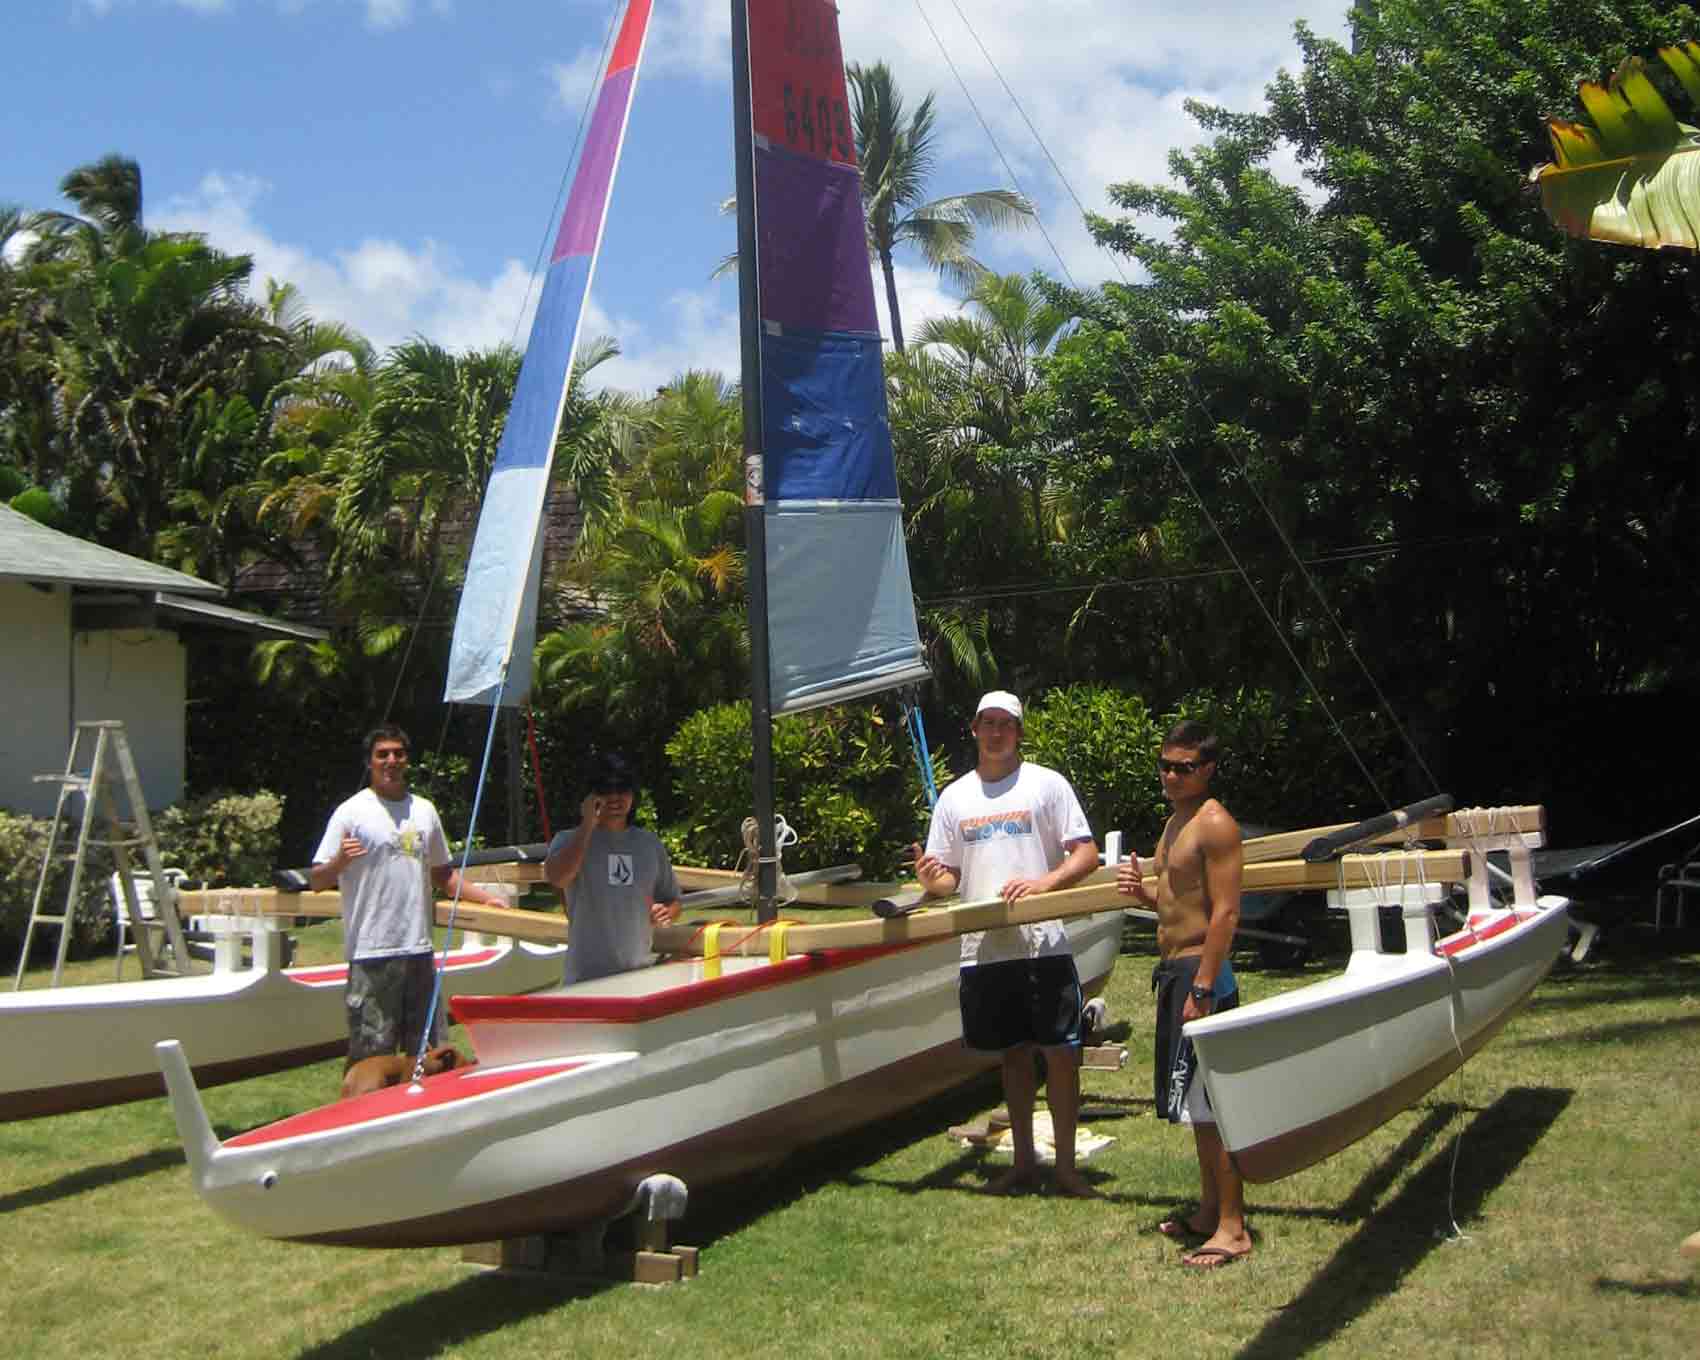 Sailing canoe Billy built while at the UH School of Engineering